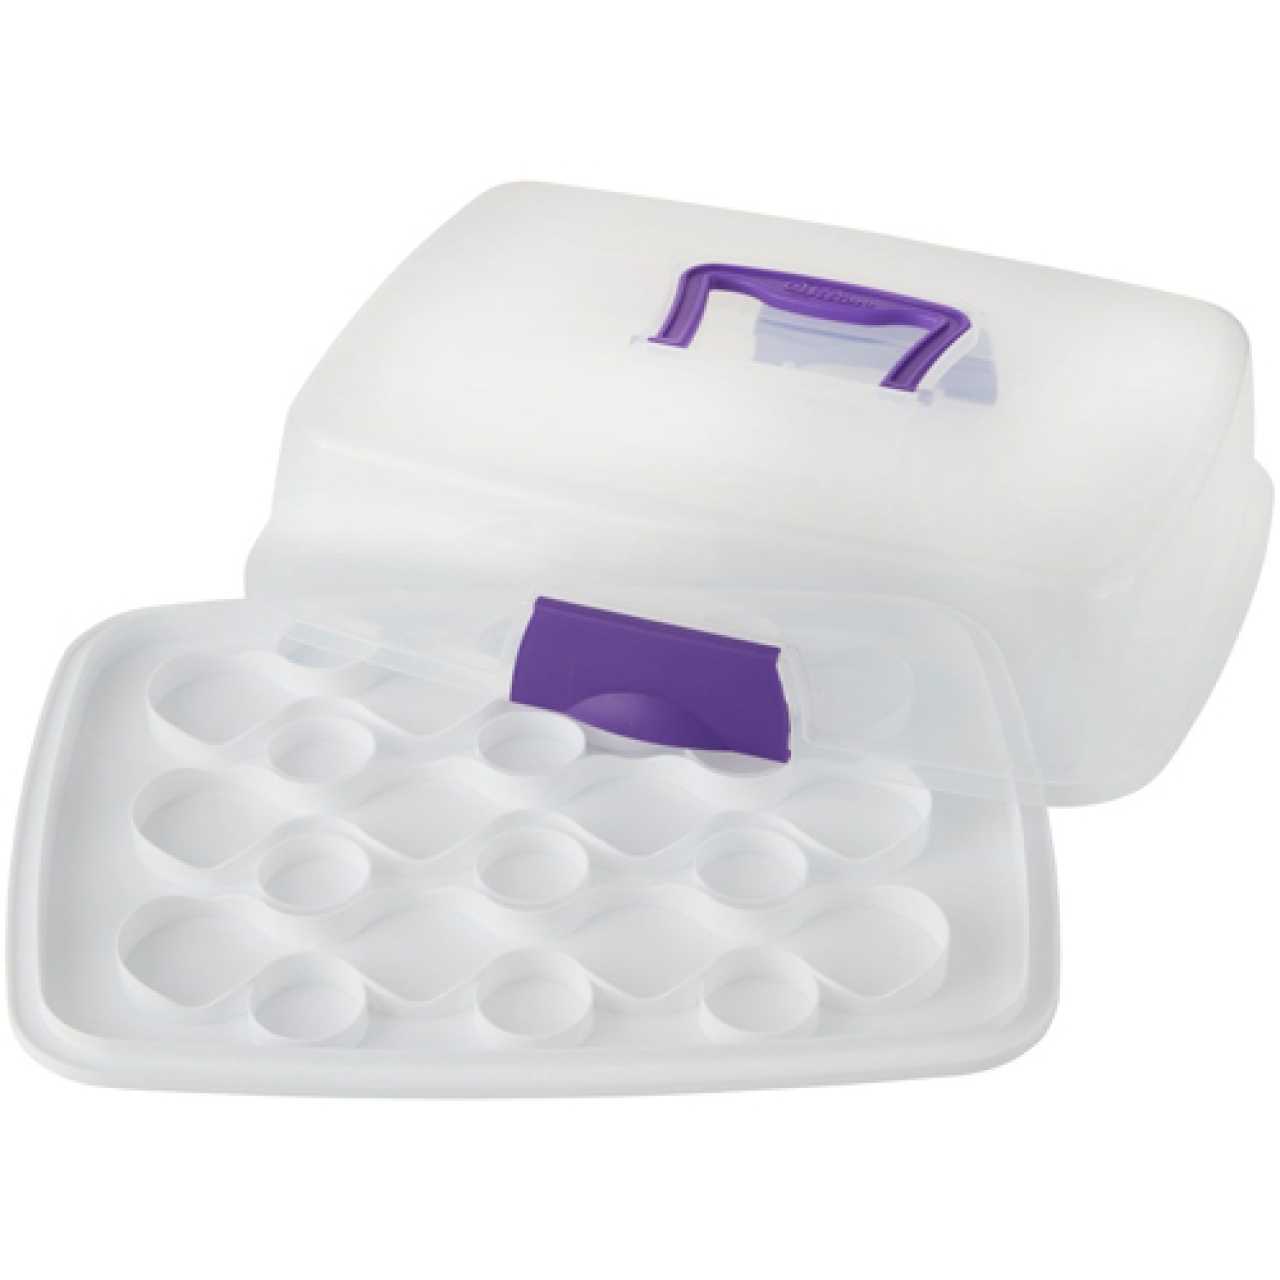 Wilton Ultimate 3 In 1 Cake Caddy